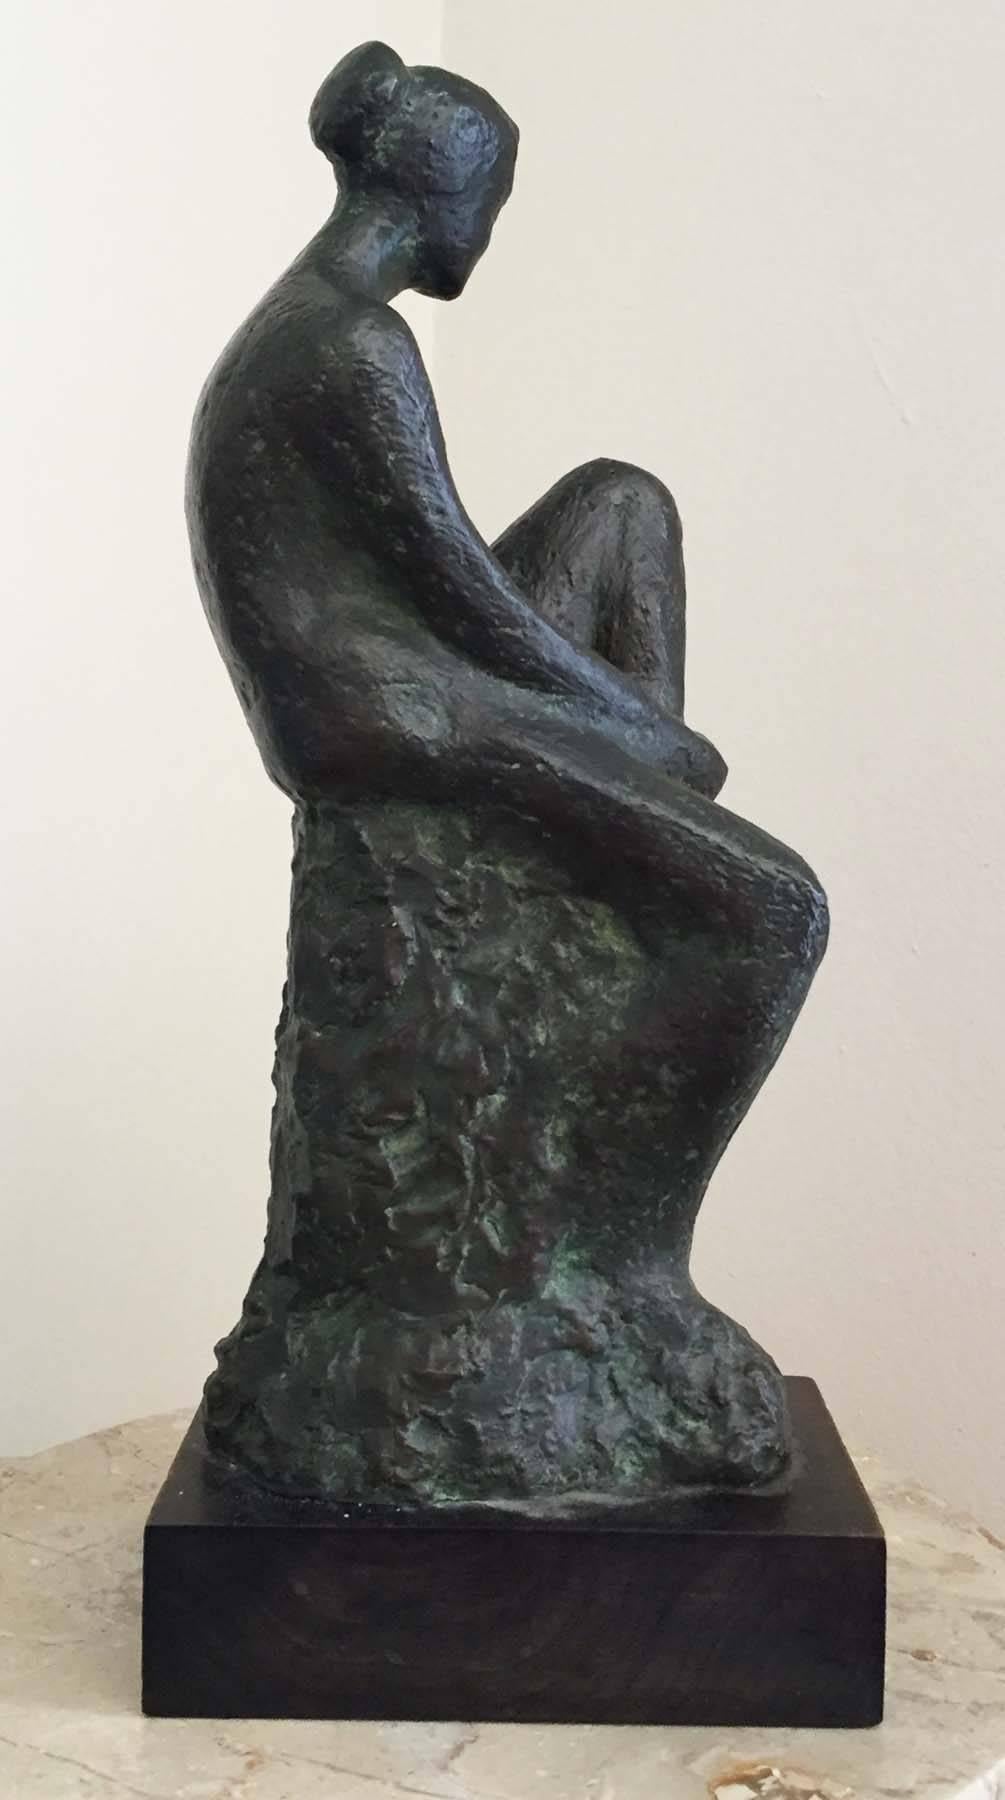 Woman on Rock - American Impressionist Sculpture by Harriet Hochberg